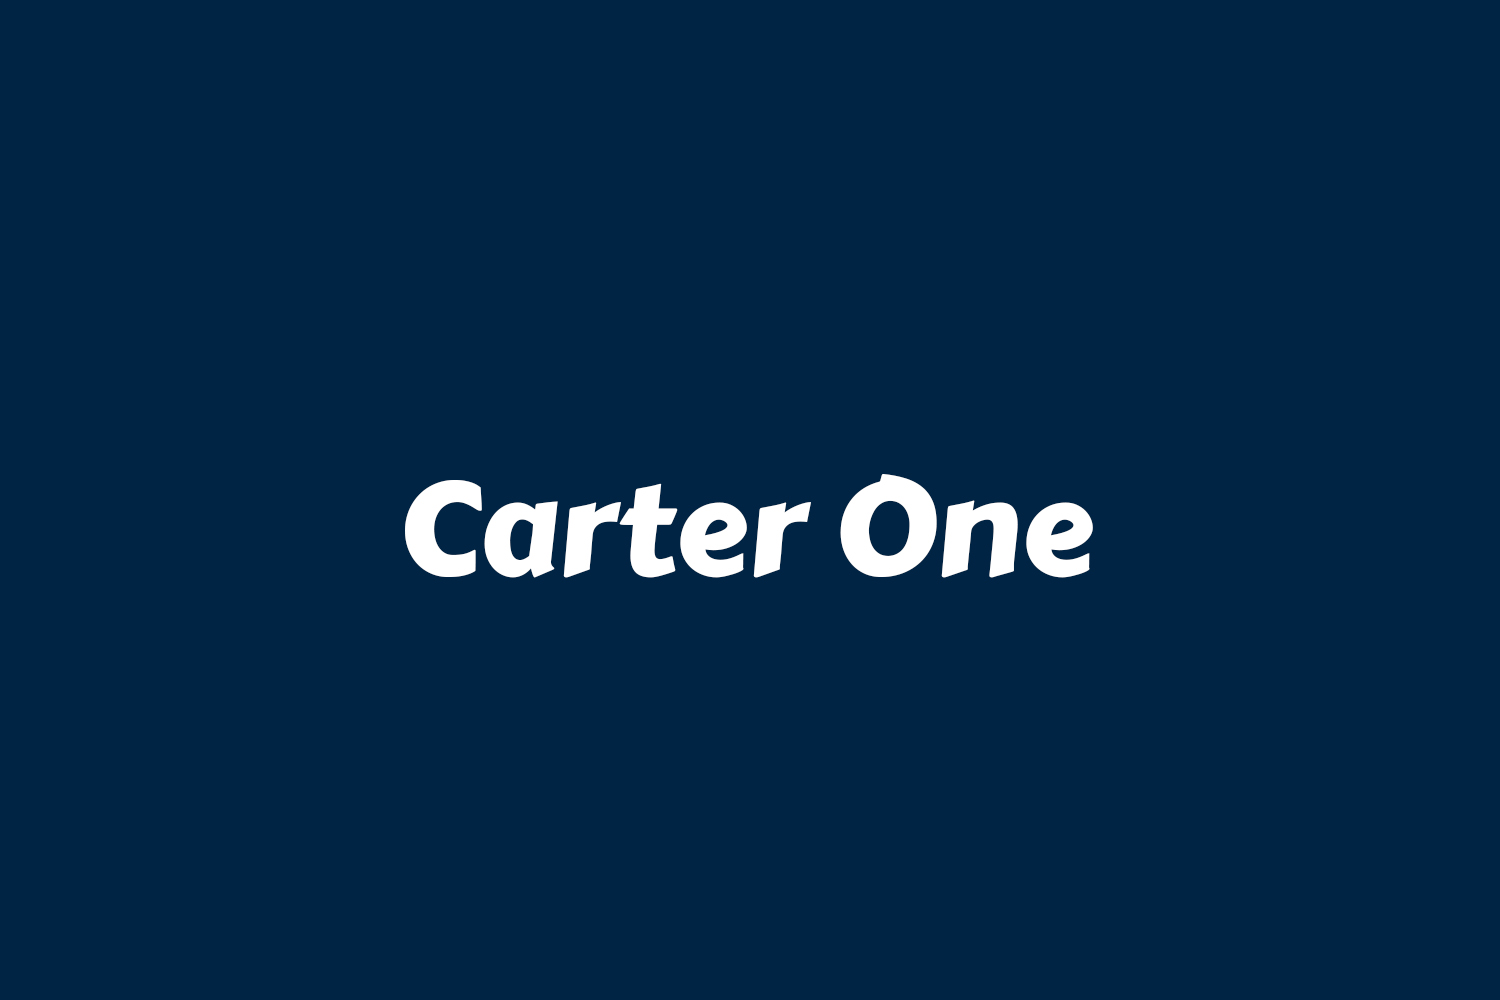 Carter One